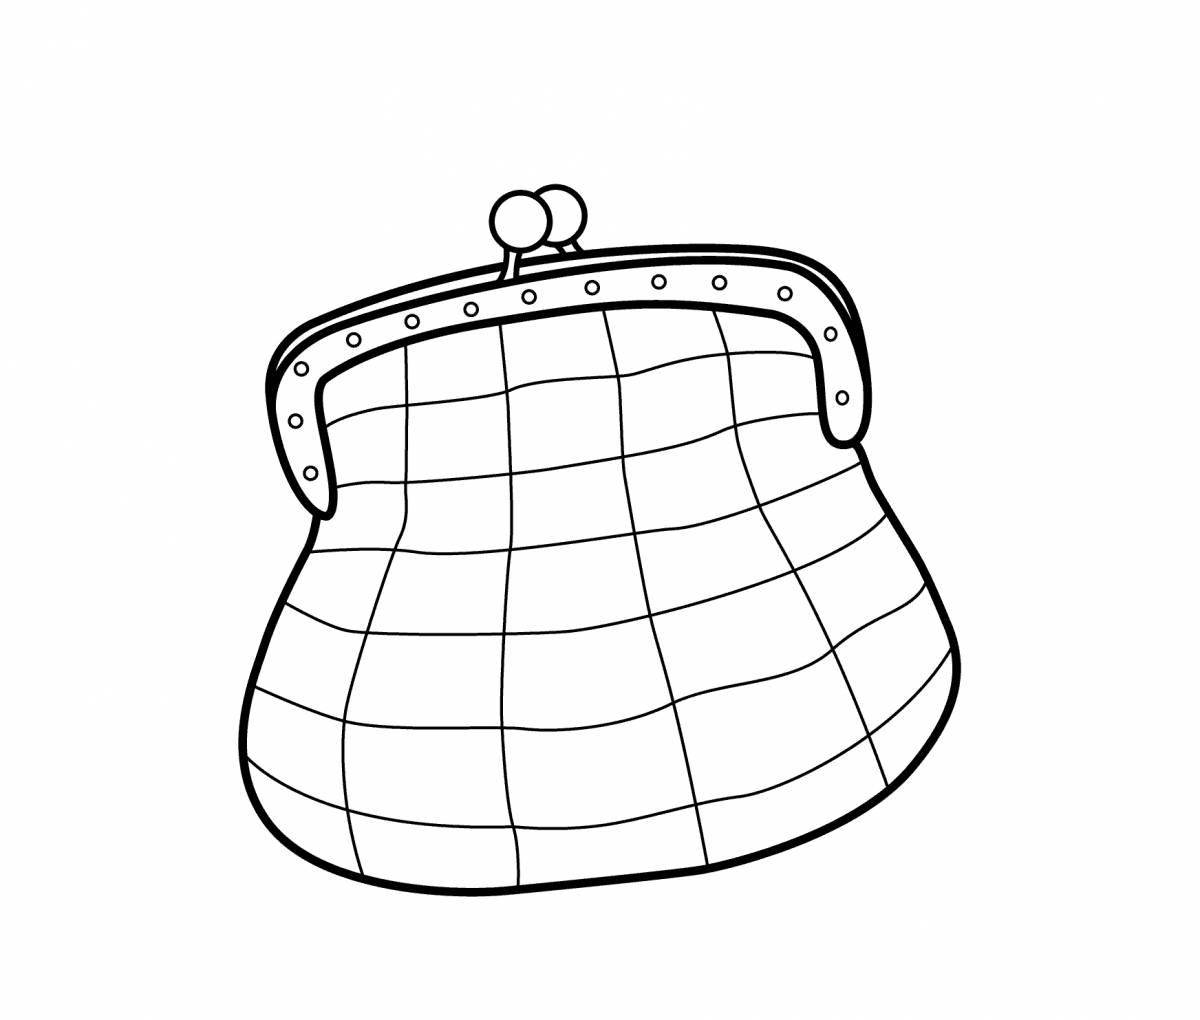 Dazzling wallet coloring page